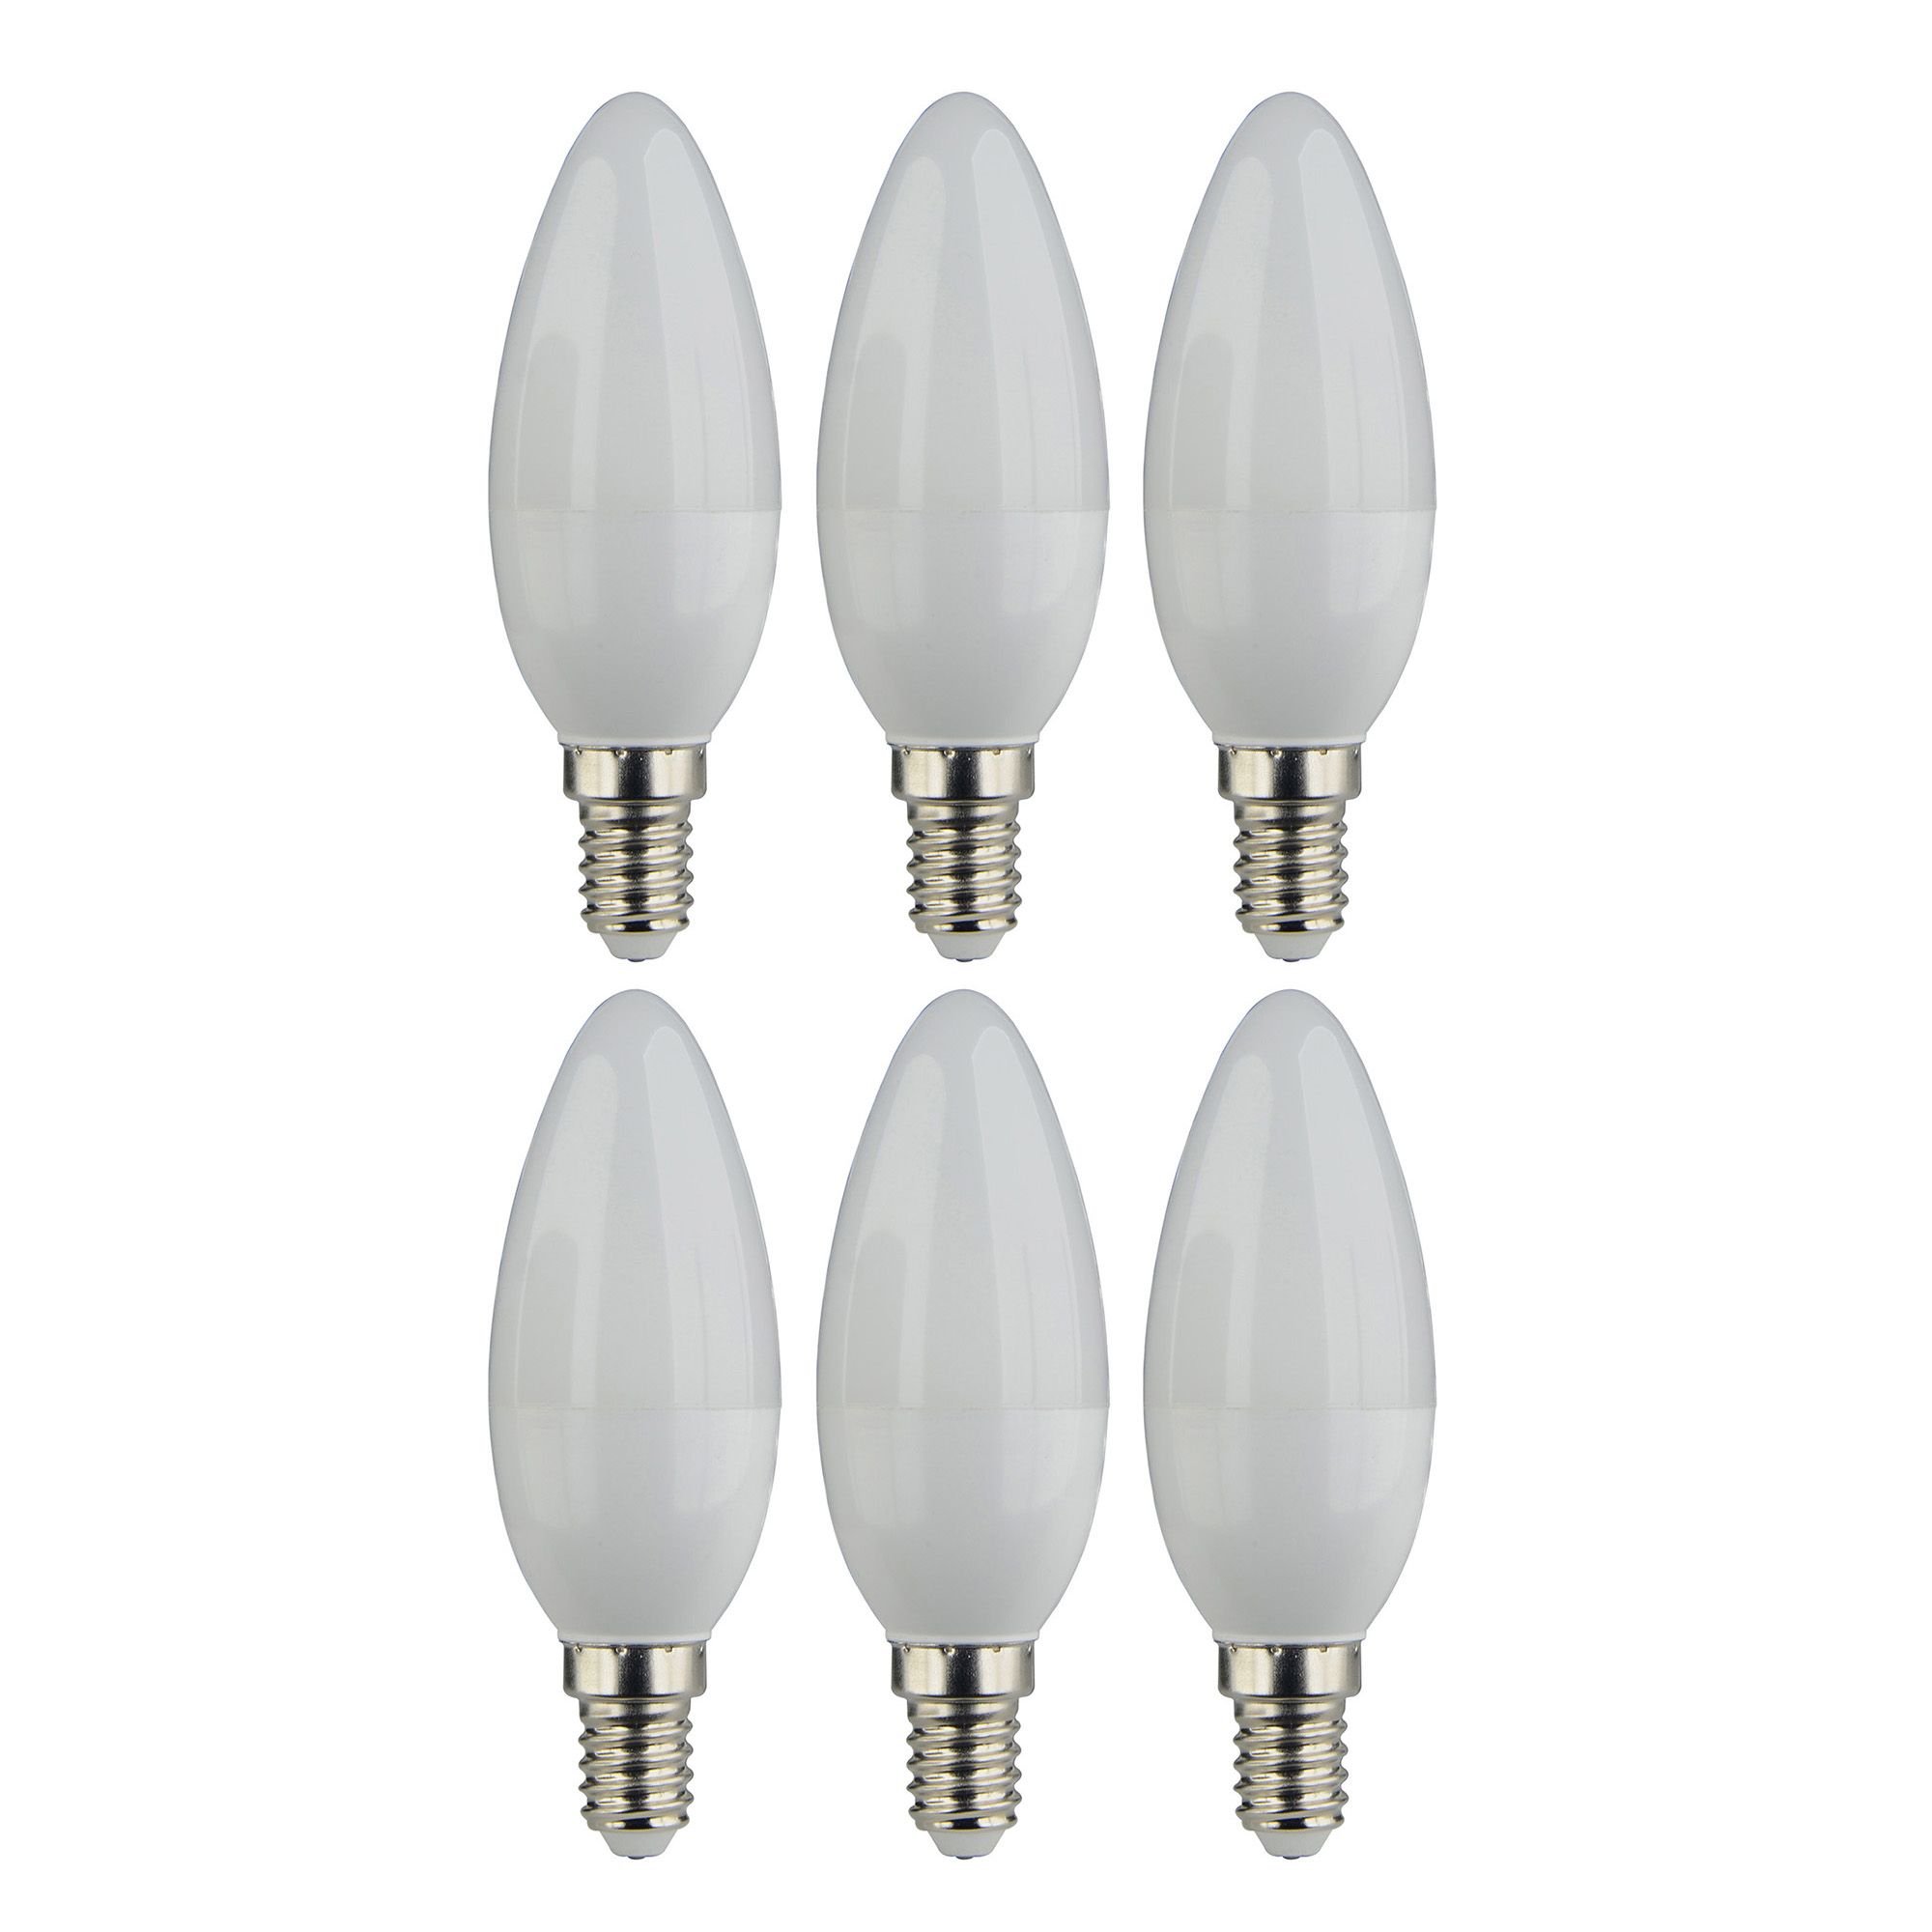 Diall E14 4.2W 470lm Frosted Candle Warm white LED Light bulb, Pack of 6